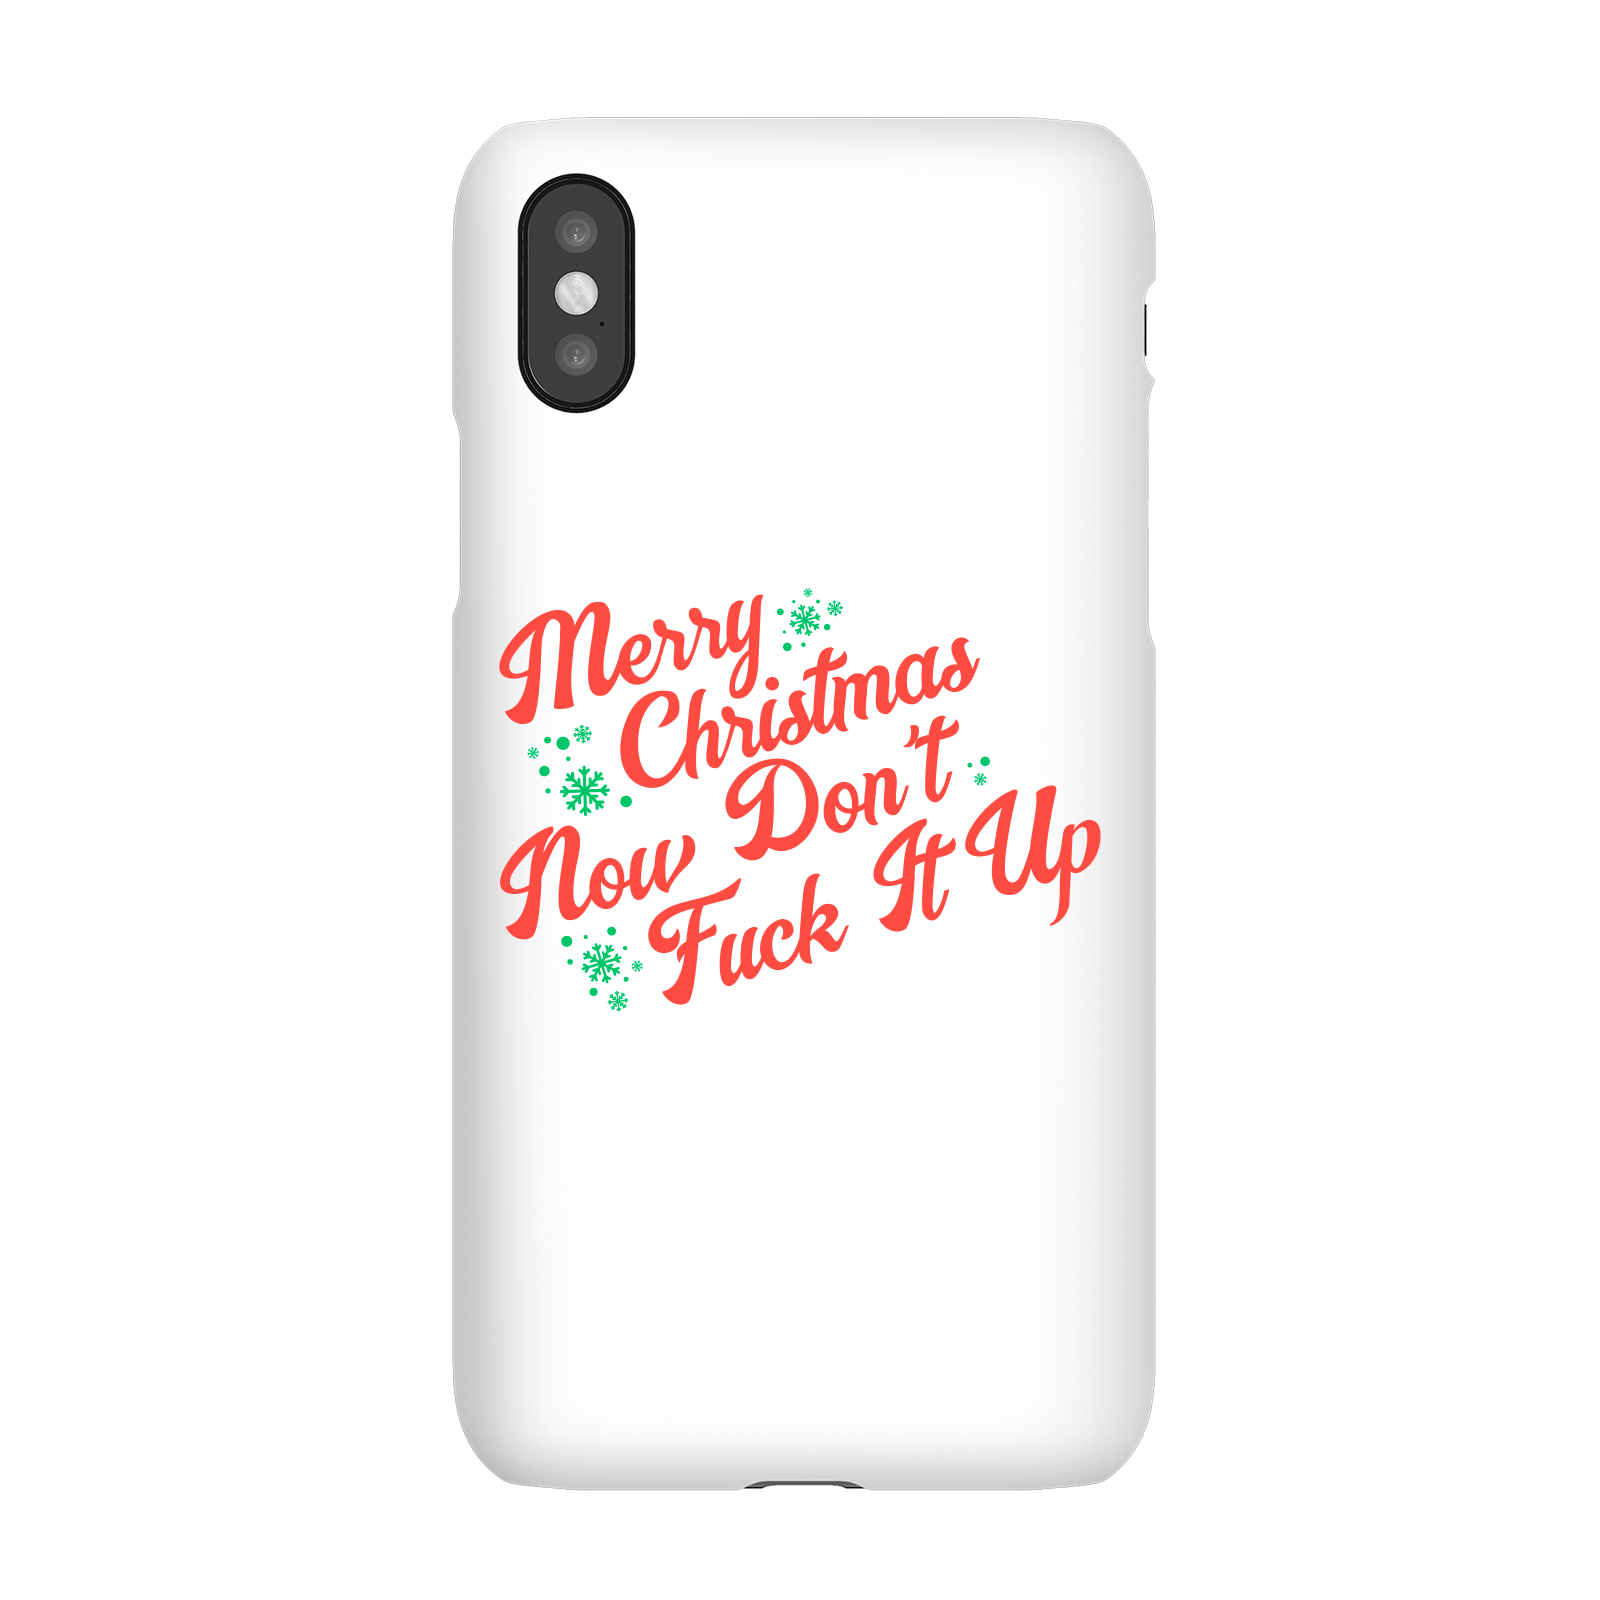 Festive Don't Fuck Up Christmas Phone Case for iPhone and Android - iPhone 5/5s - Snap Case - Matte